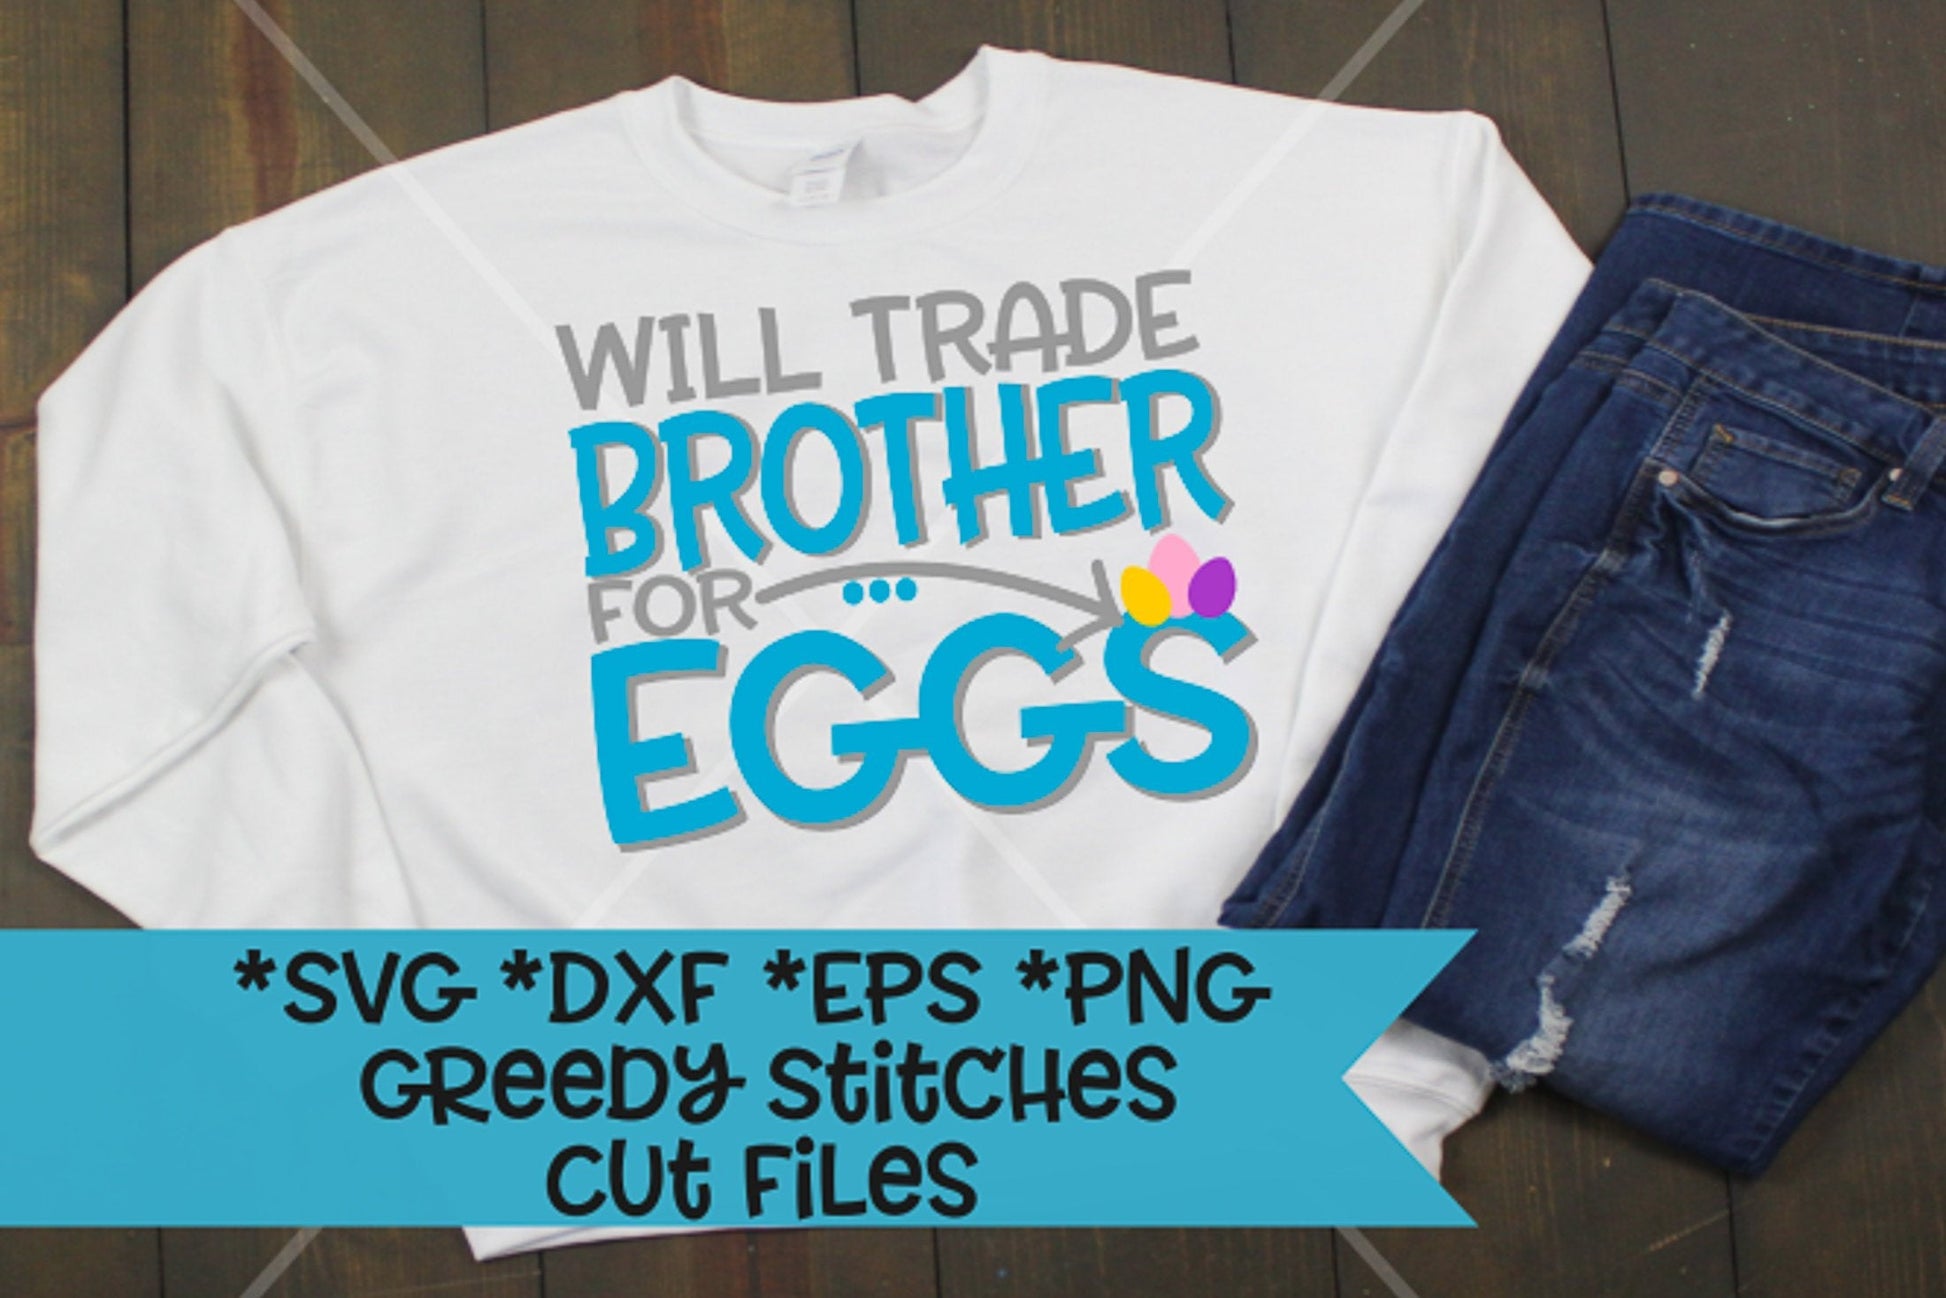 Will Trade Brother For Eggs svg dxf eps png | Easter SvG | Eggs | Trade Brother For Eggs DxF | Easter Eggs SvG | Instant Download Cut File